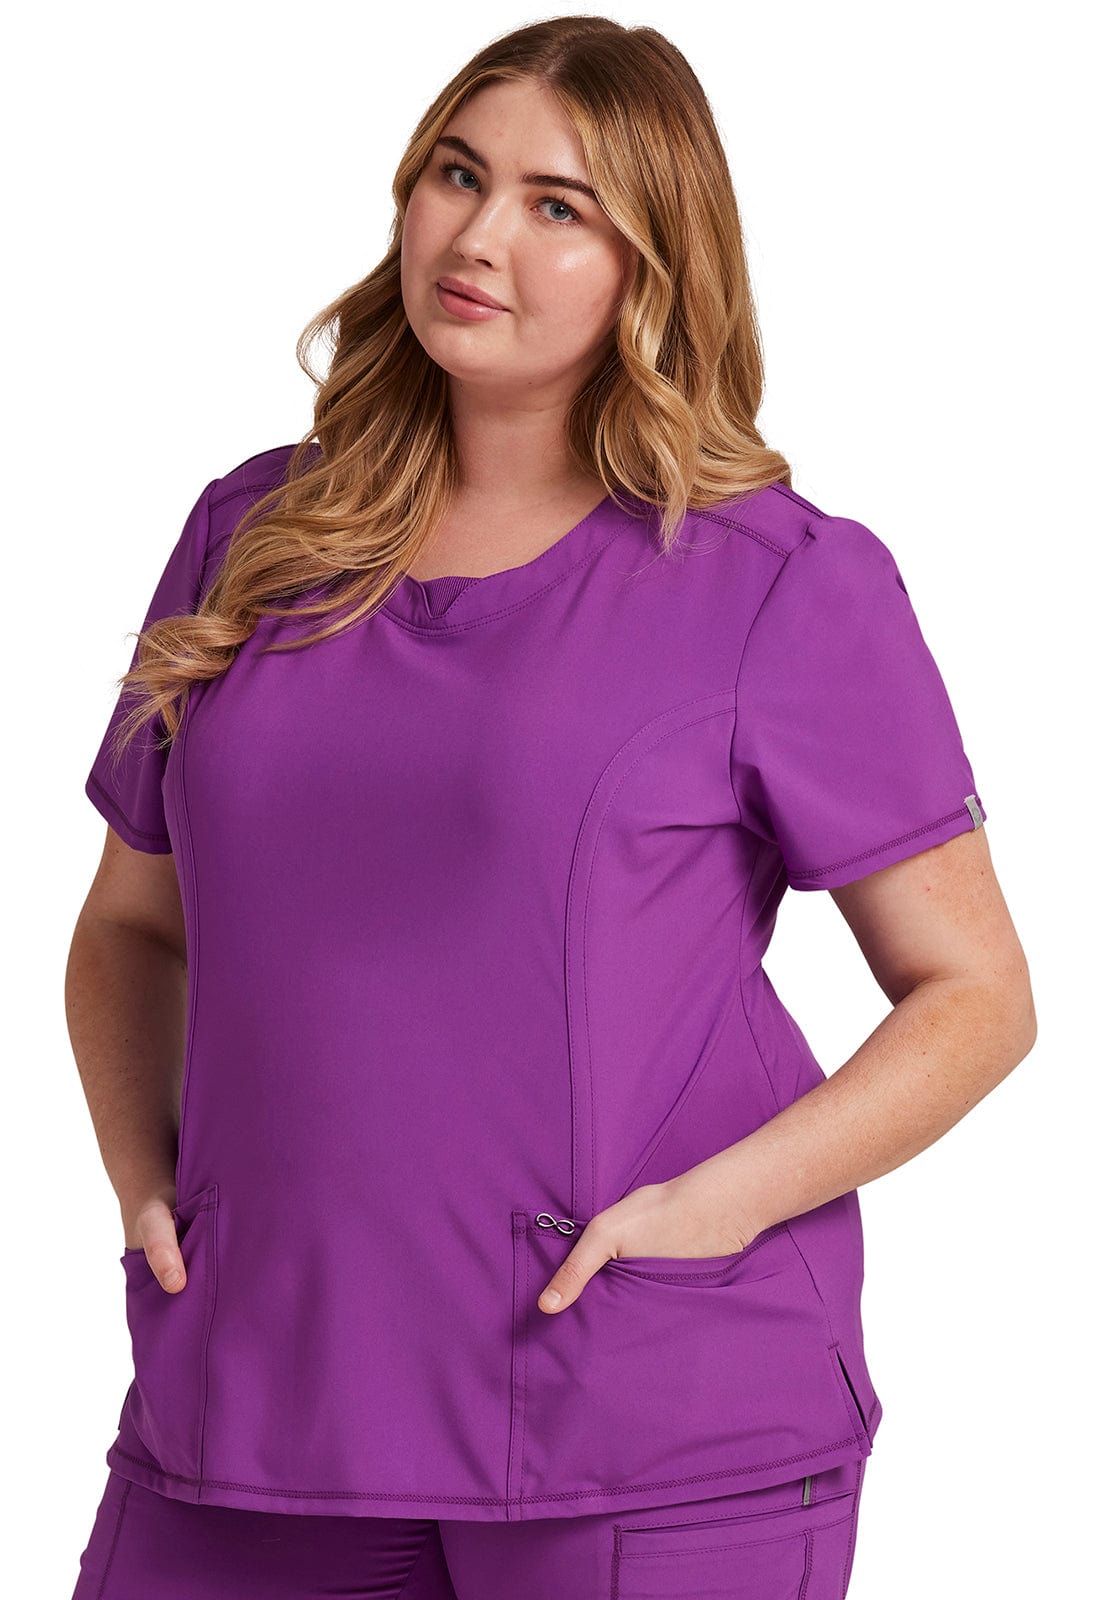 Cherokee Infinity Infinity  Round Neck Top Bright Violet 2624A